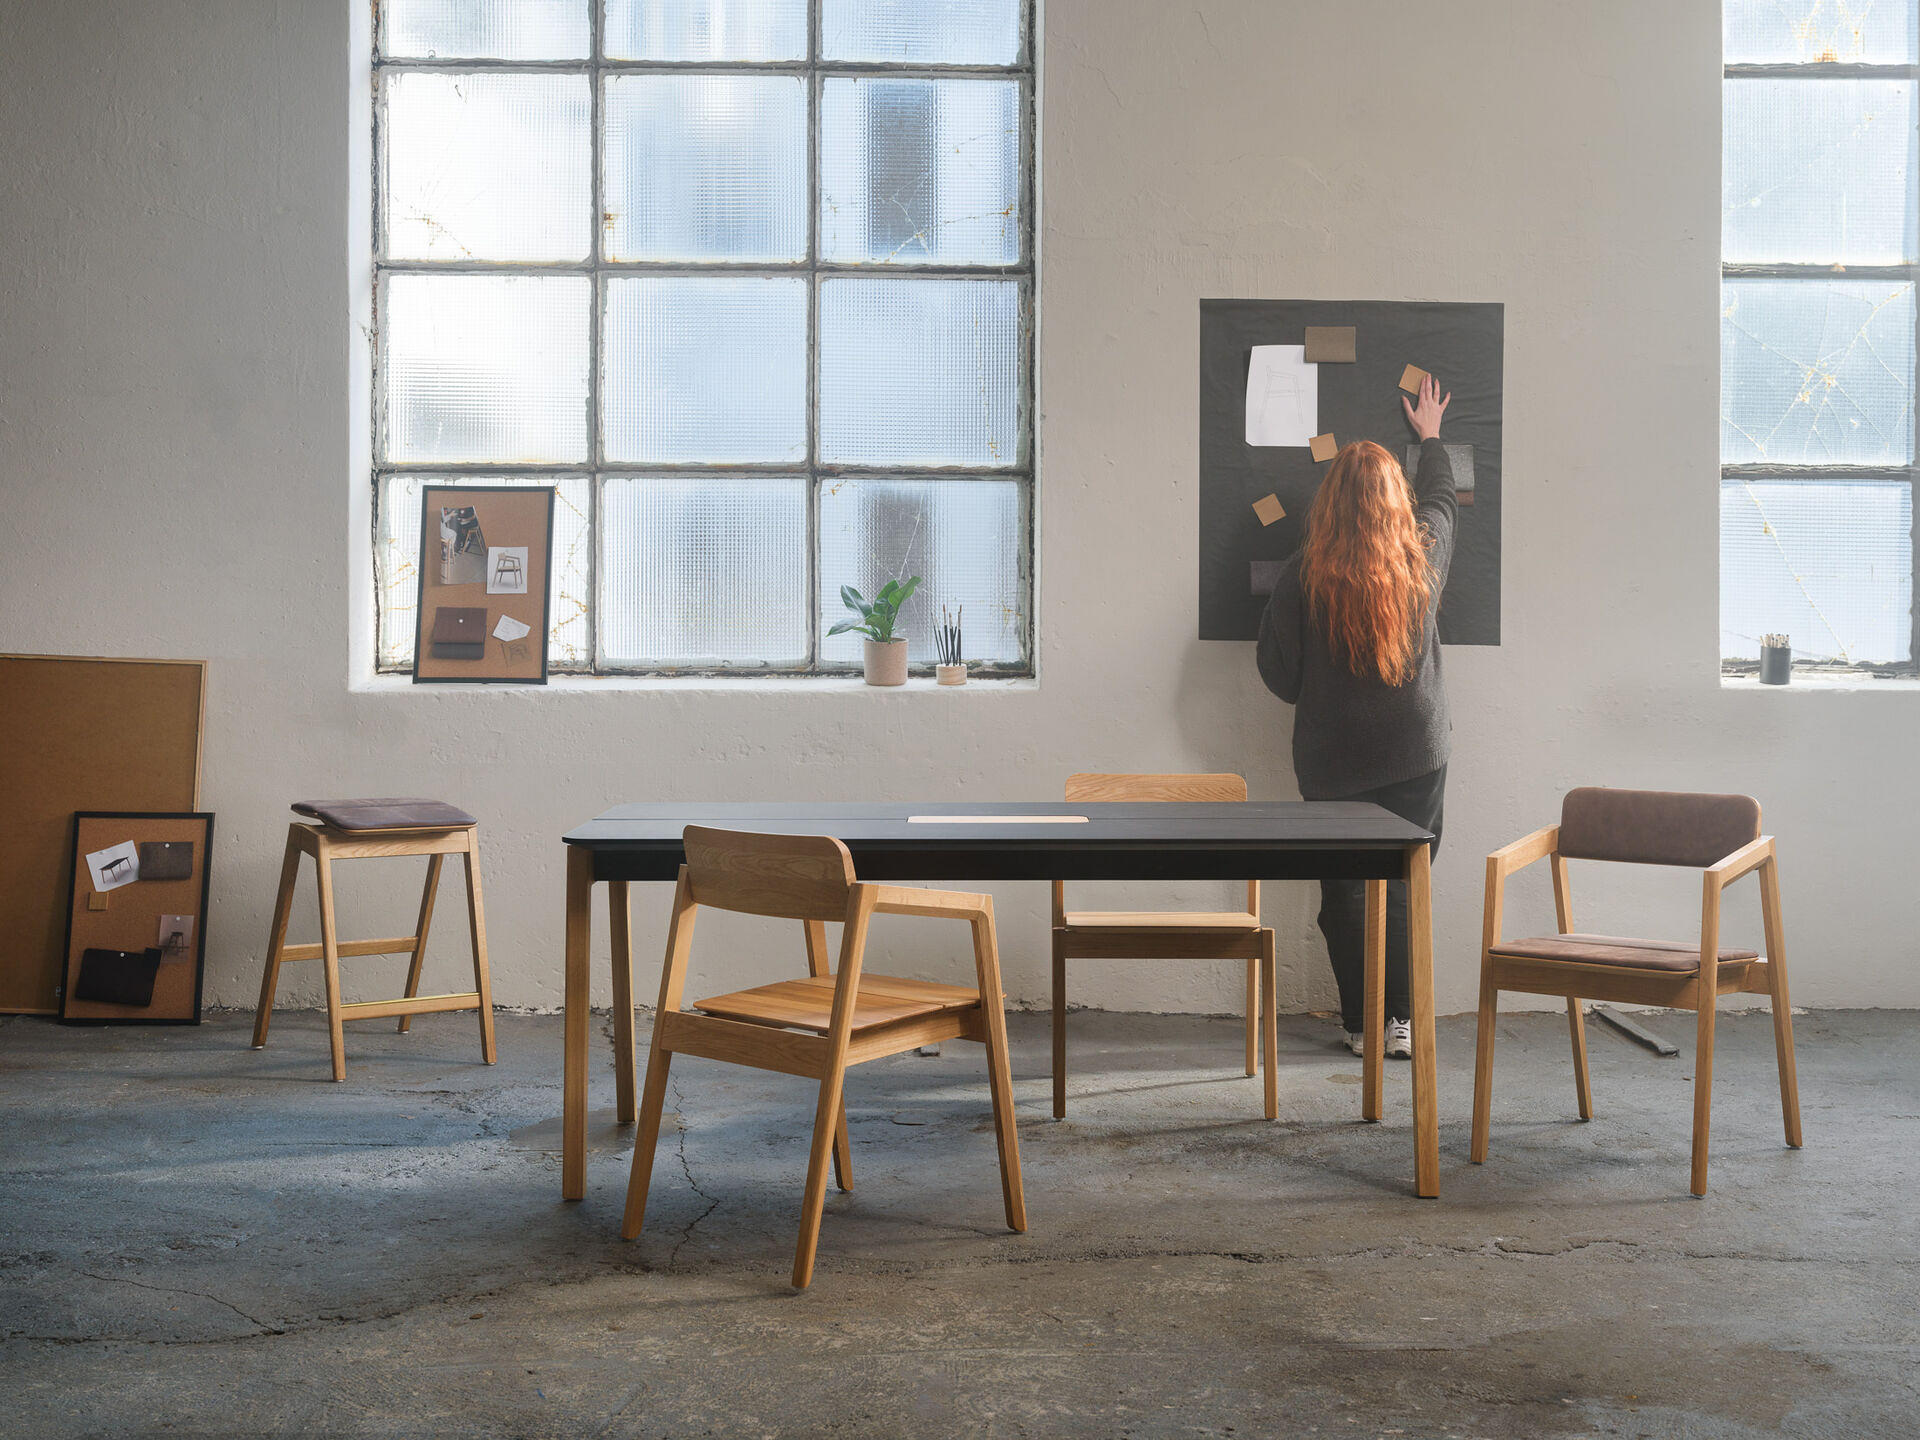 Knekk Table by Jon Fauske for Fora Form